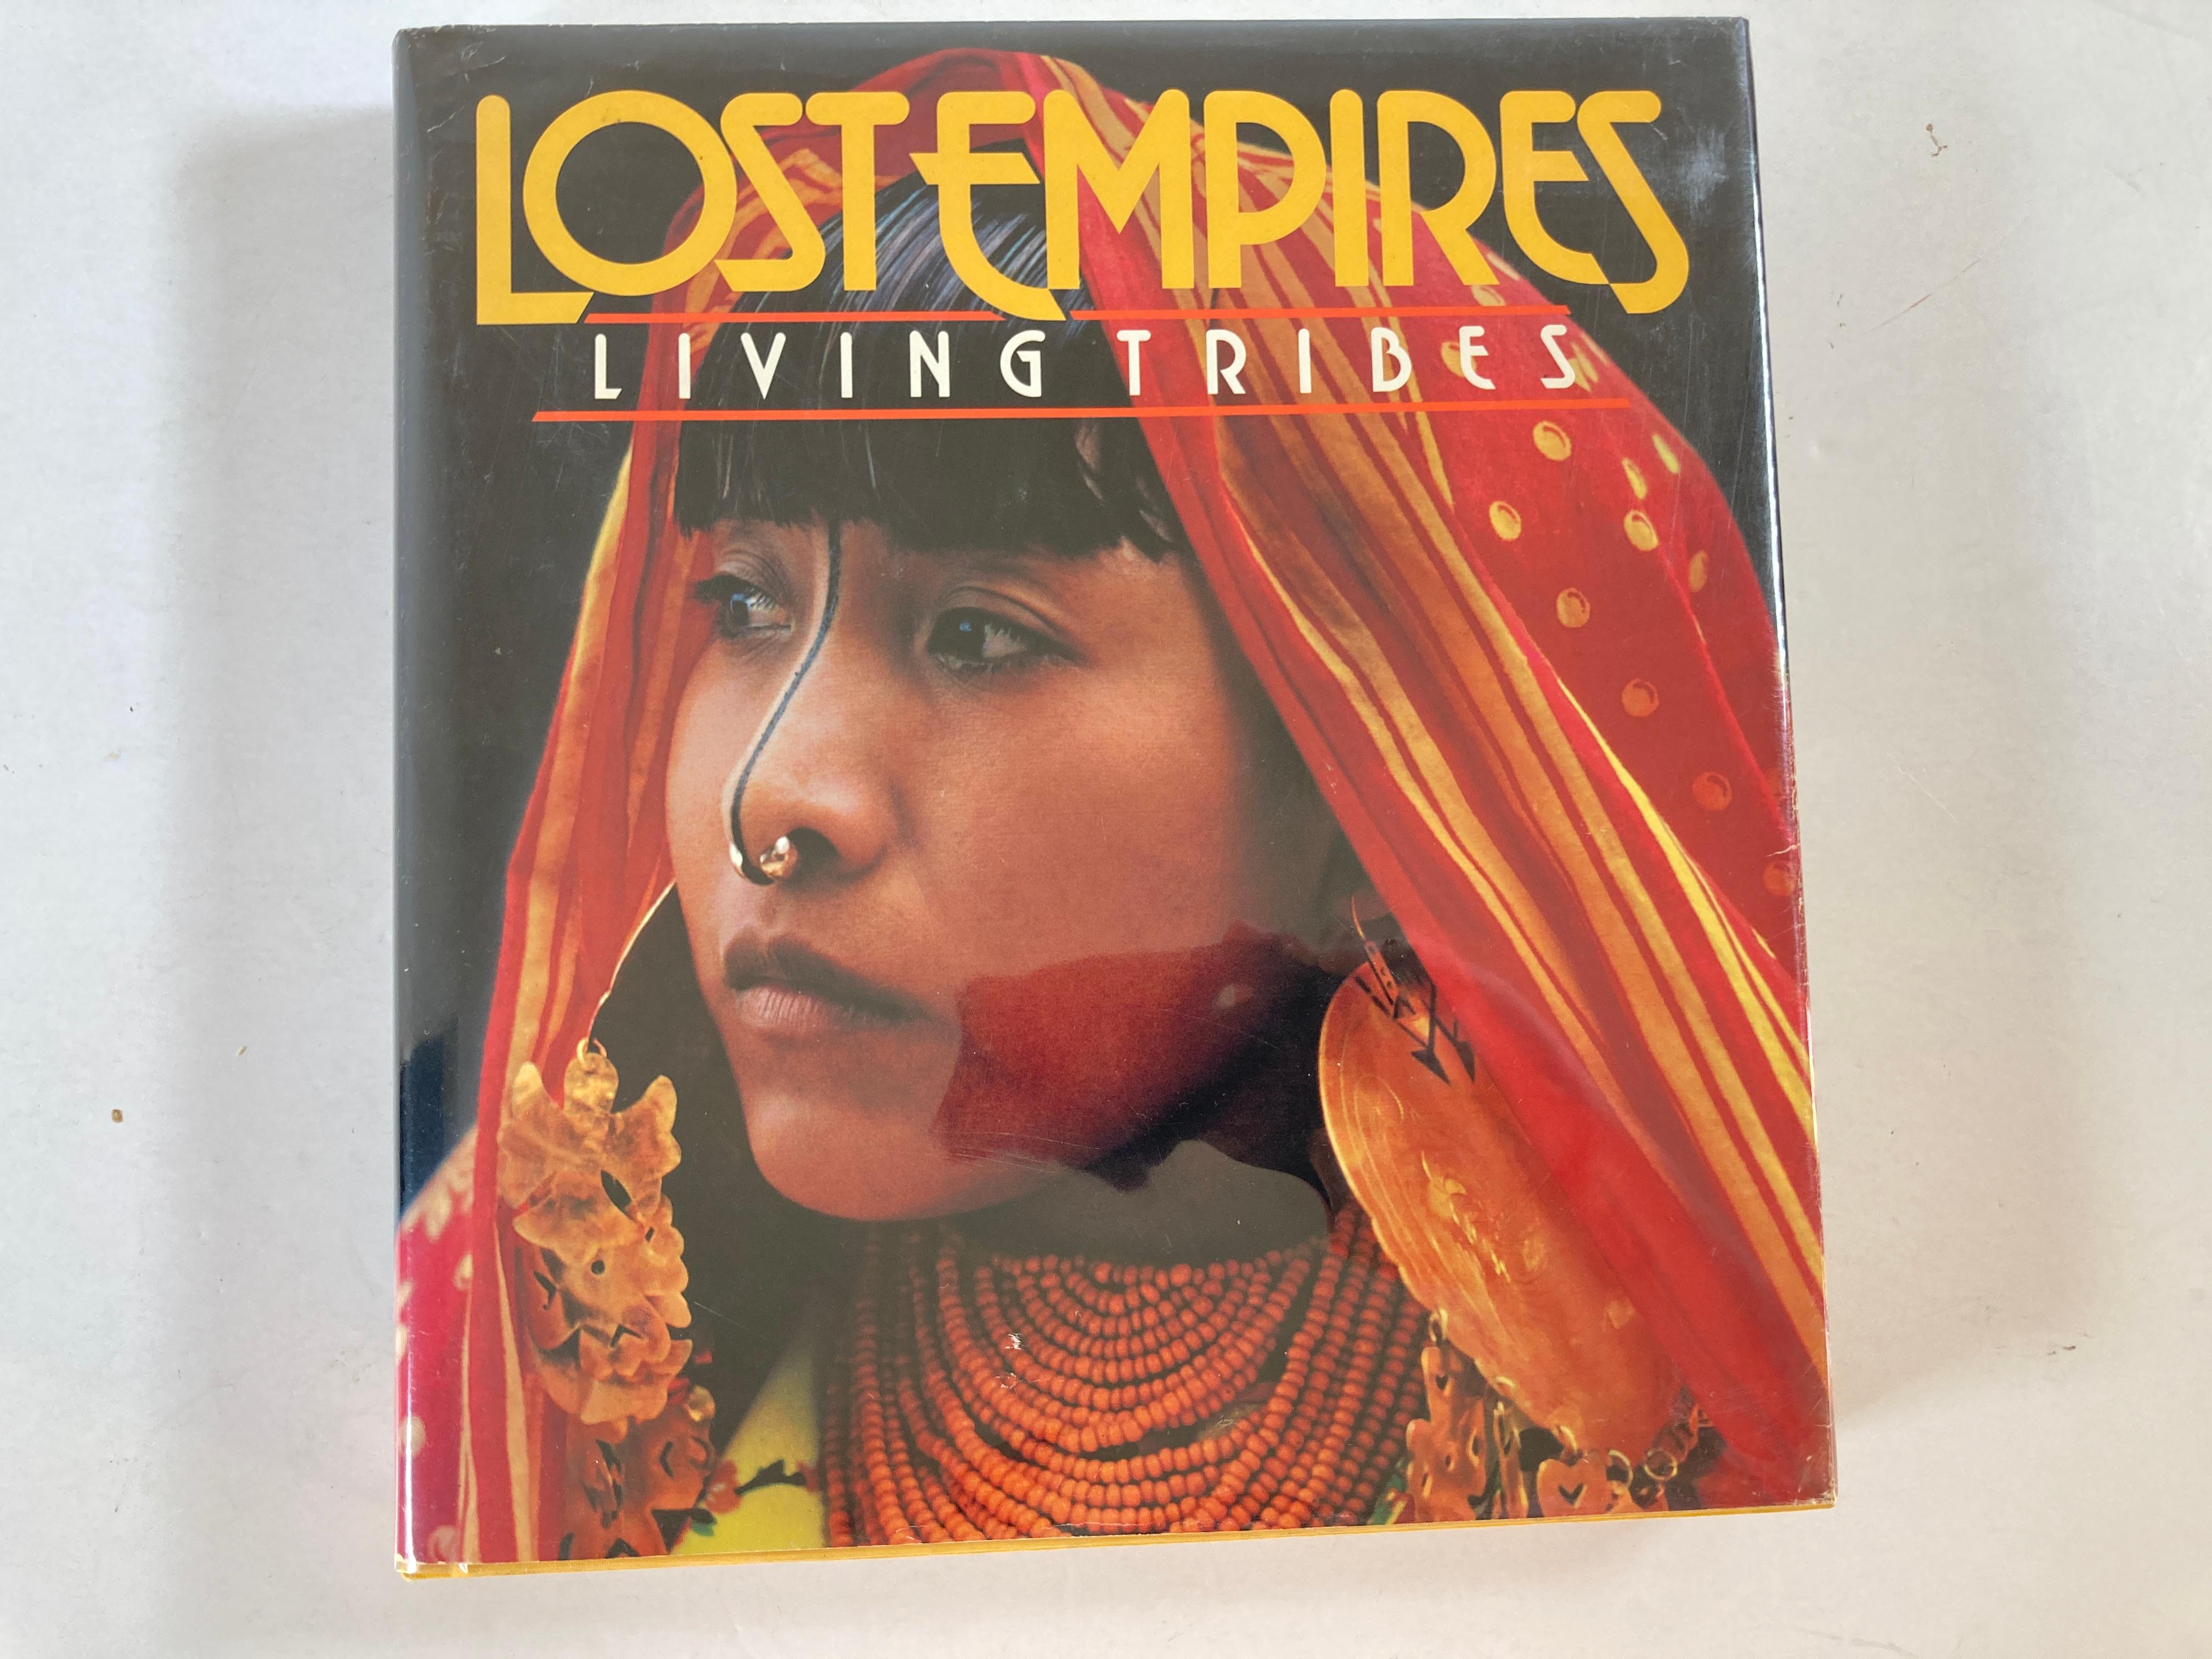 Lost Empires: Living Tribes by Ross S. Bennett
Hardcover, 402 pages
Published November 1st 1982 by National Geographic Society.
Hardcover; Washington, D.c.:
This is a beautiful large coffee table Art and Photography book.
Title
LOST EMPIRES,